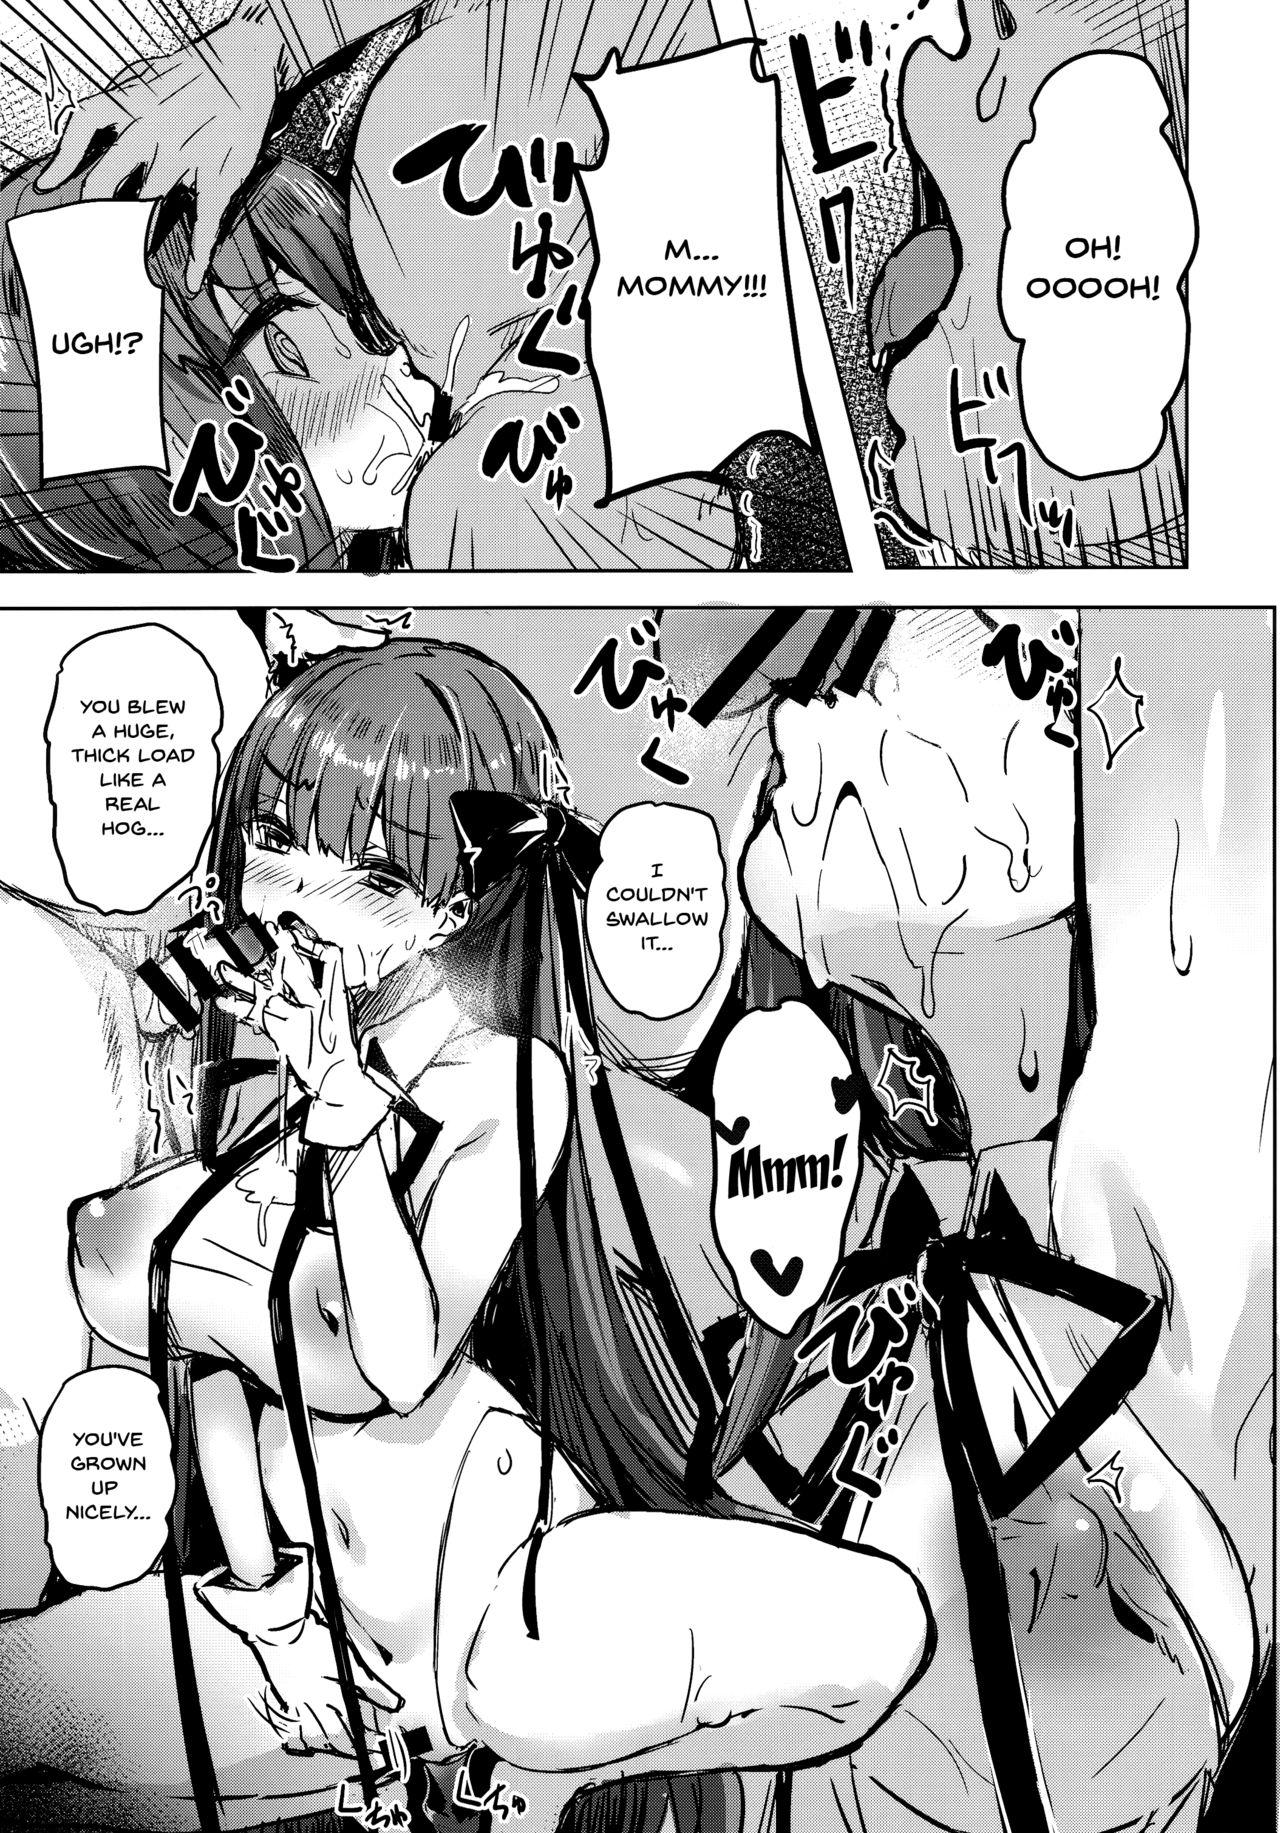 Curious BB mama to ko buta-san | Mommy BB and Little Piggy - Fate grand order Gay Longhair - Page 10